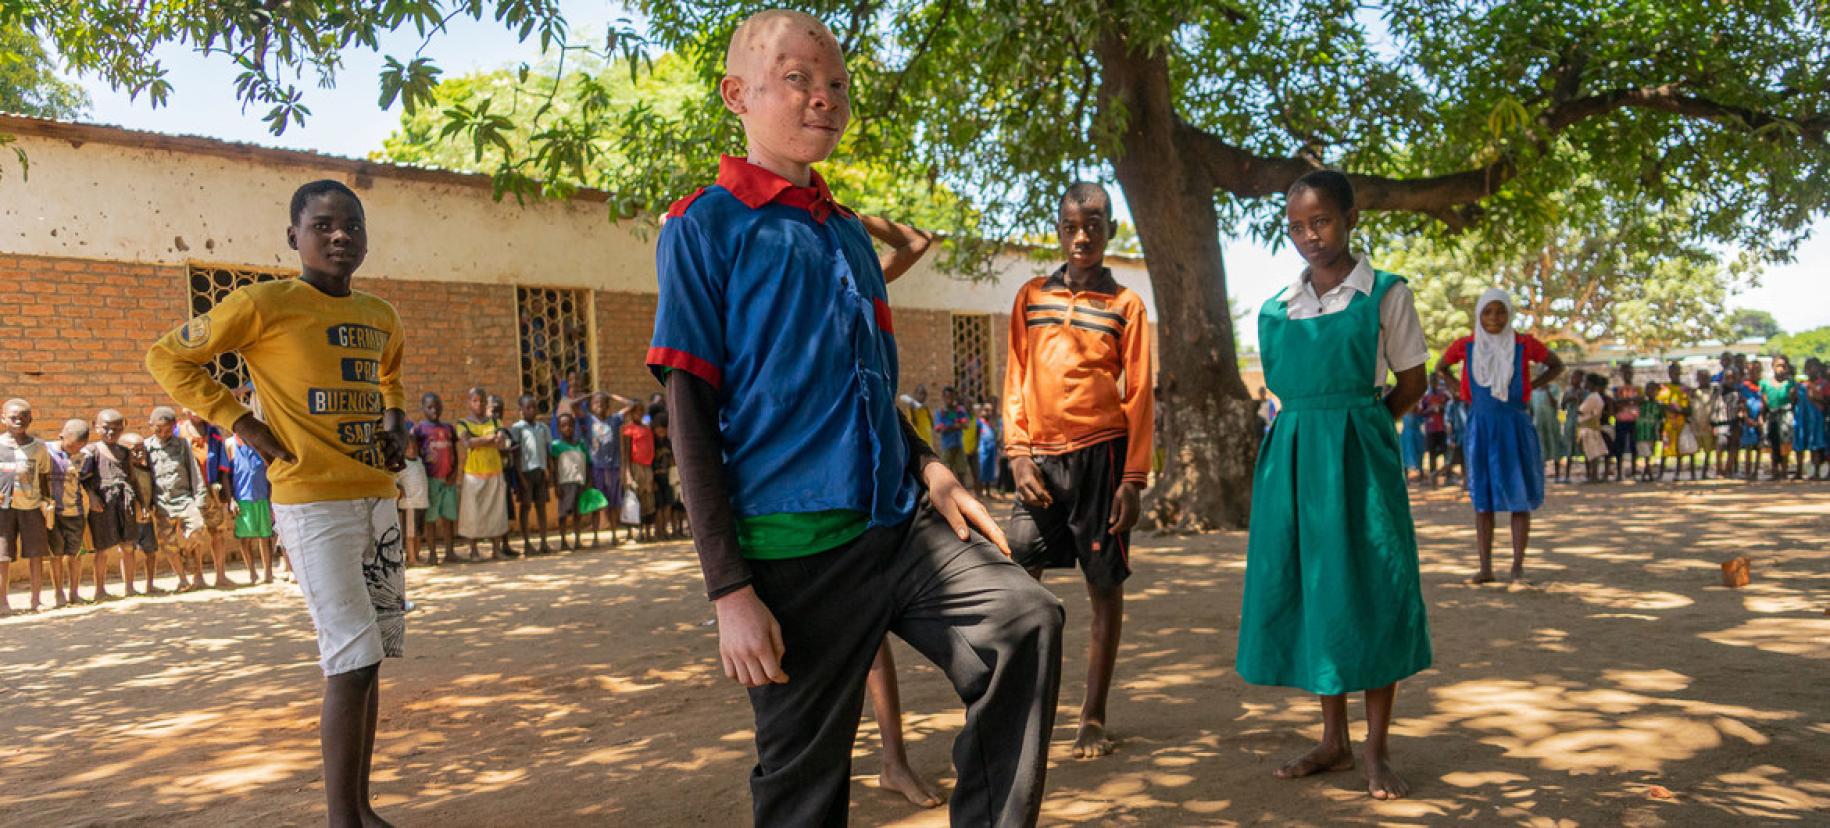 Chinsisi Jafali, a 14-year-old with albinism in Malawi stands proudly alongside his classmates.